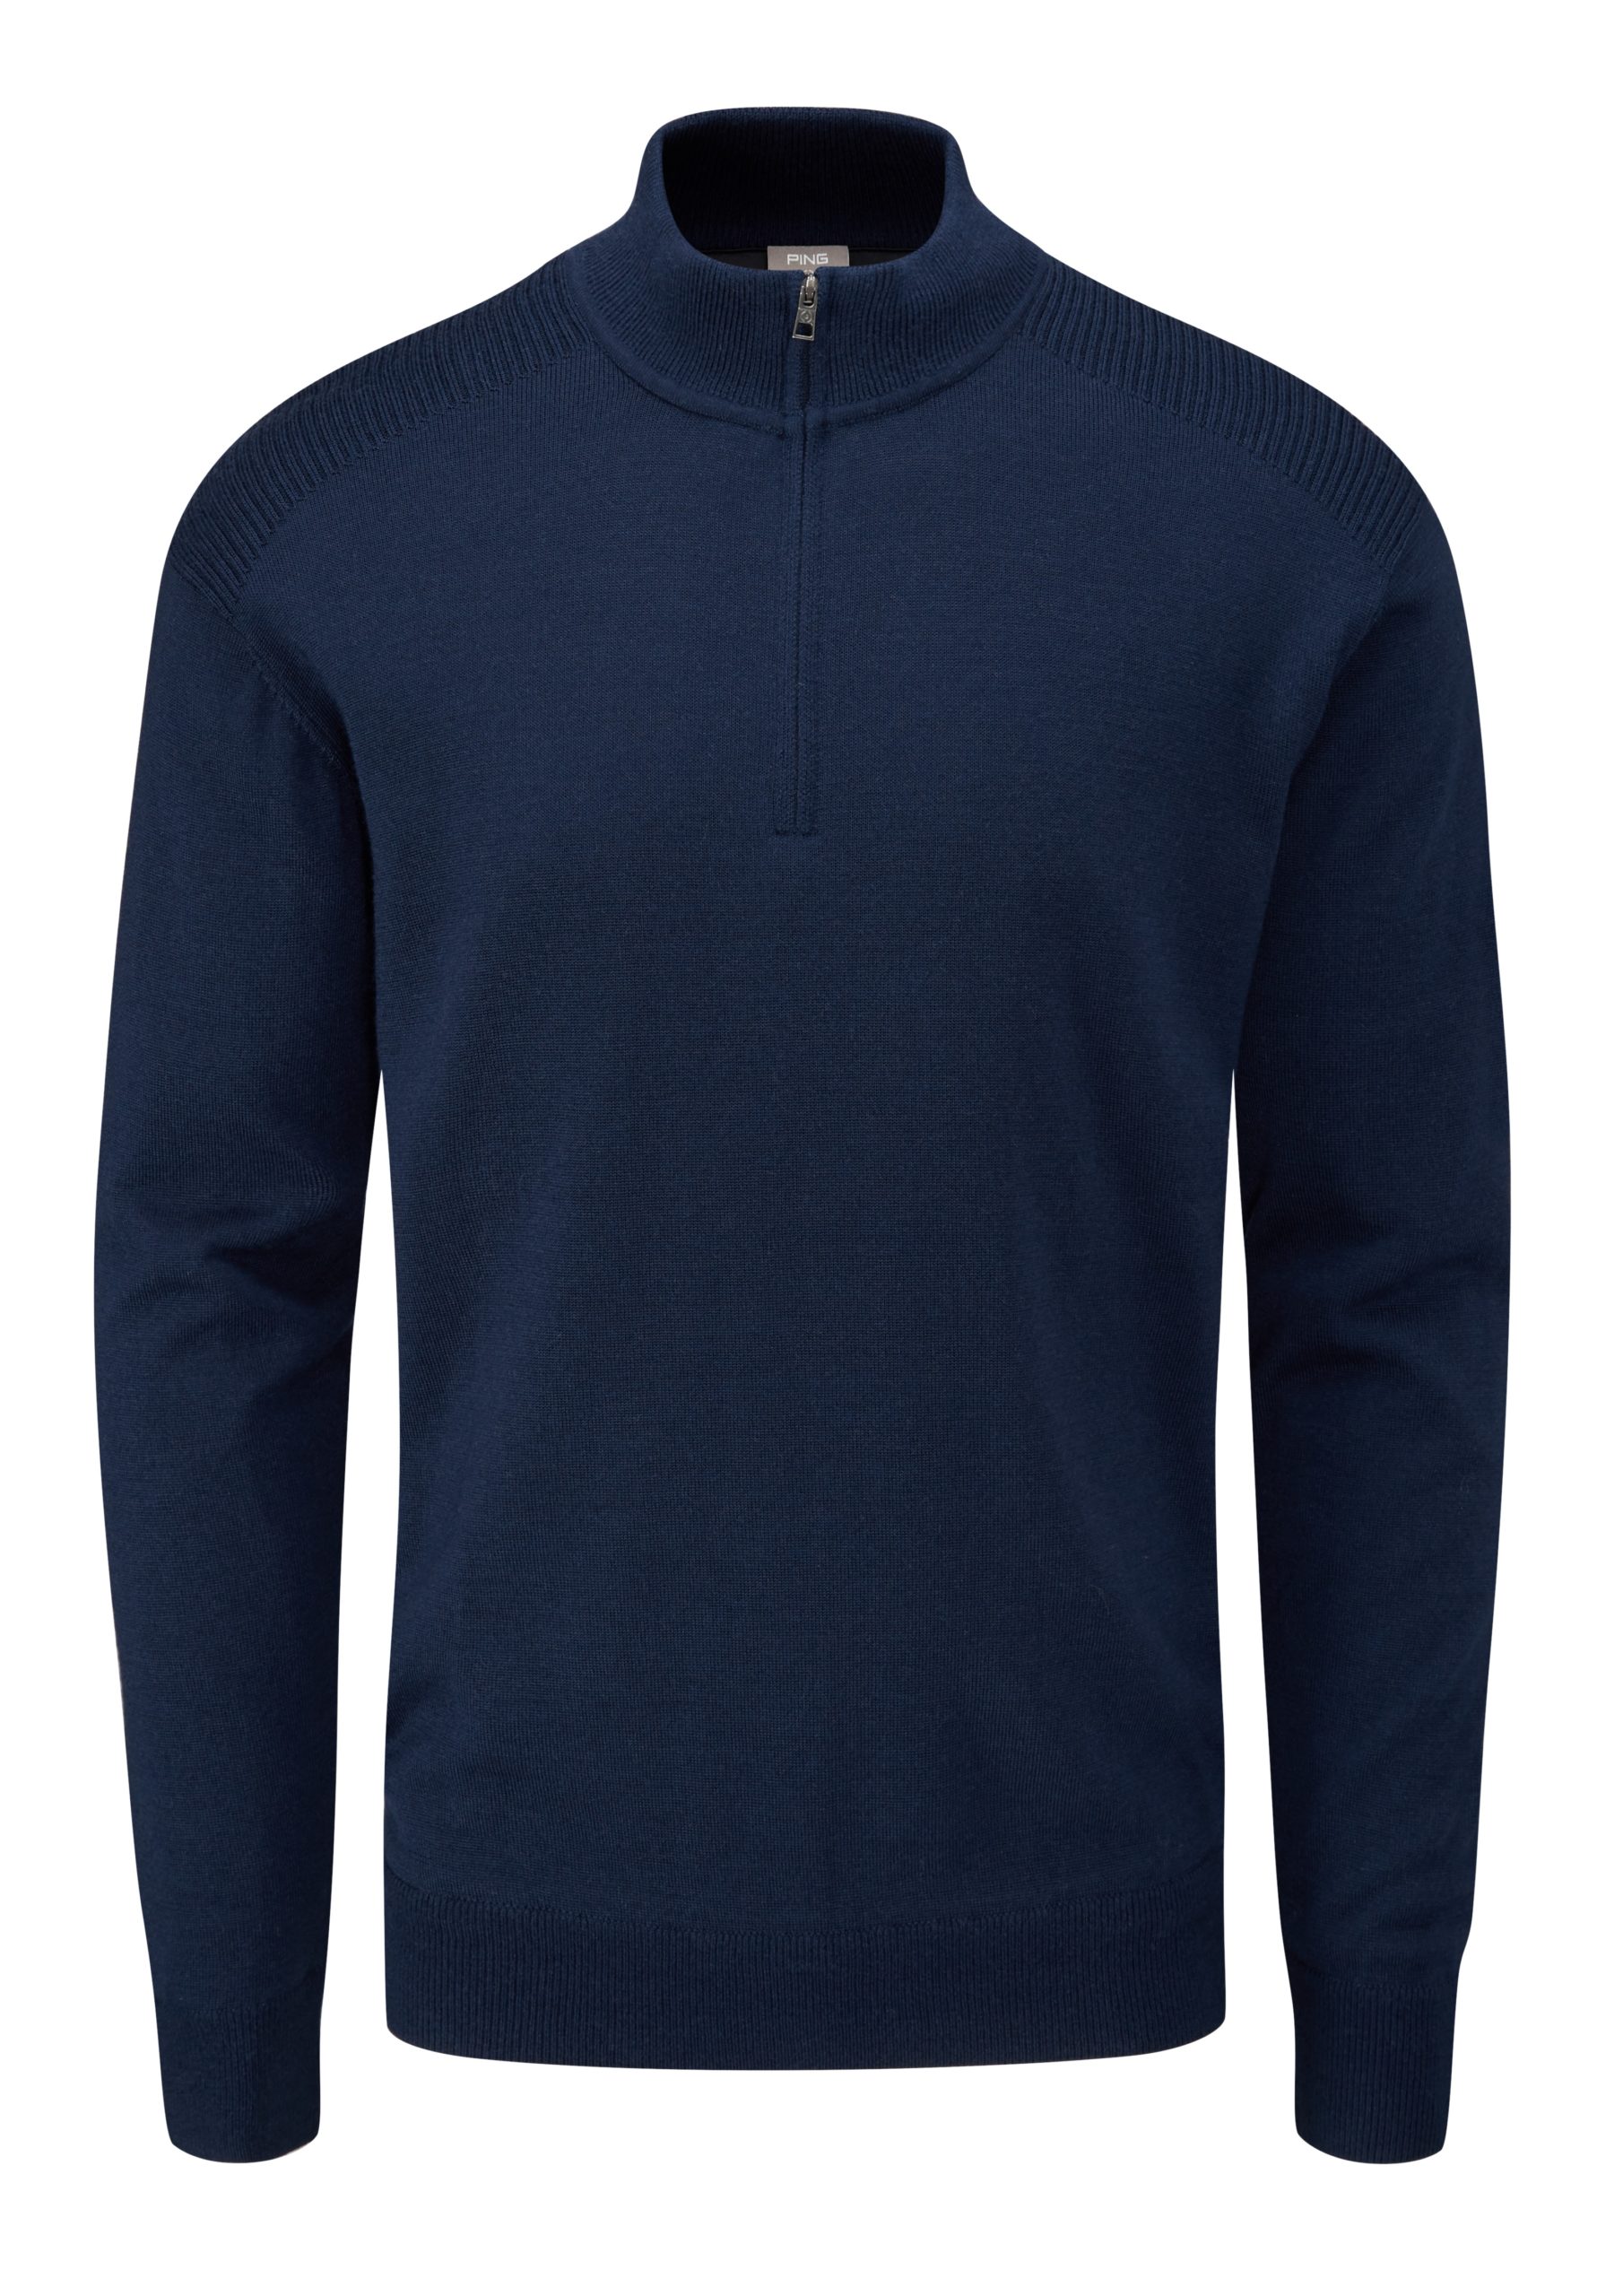 PING Couper Lined Sweater - MB Performance Golf